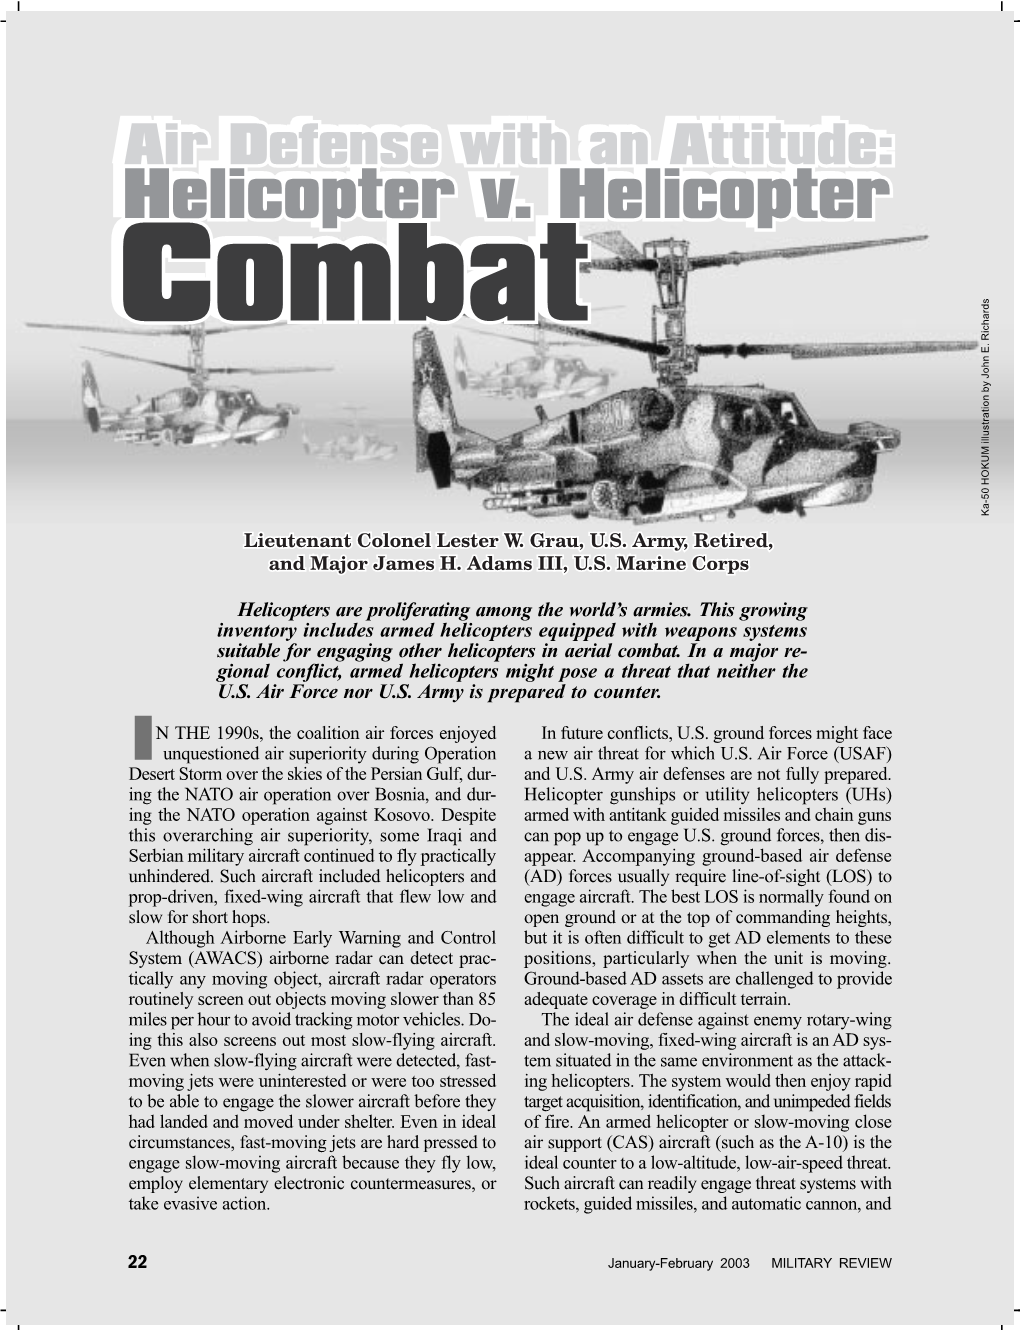 Helicopter V. Helicopter Combat